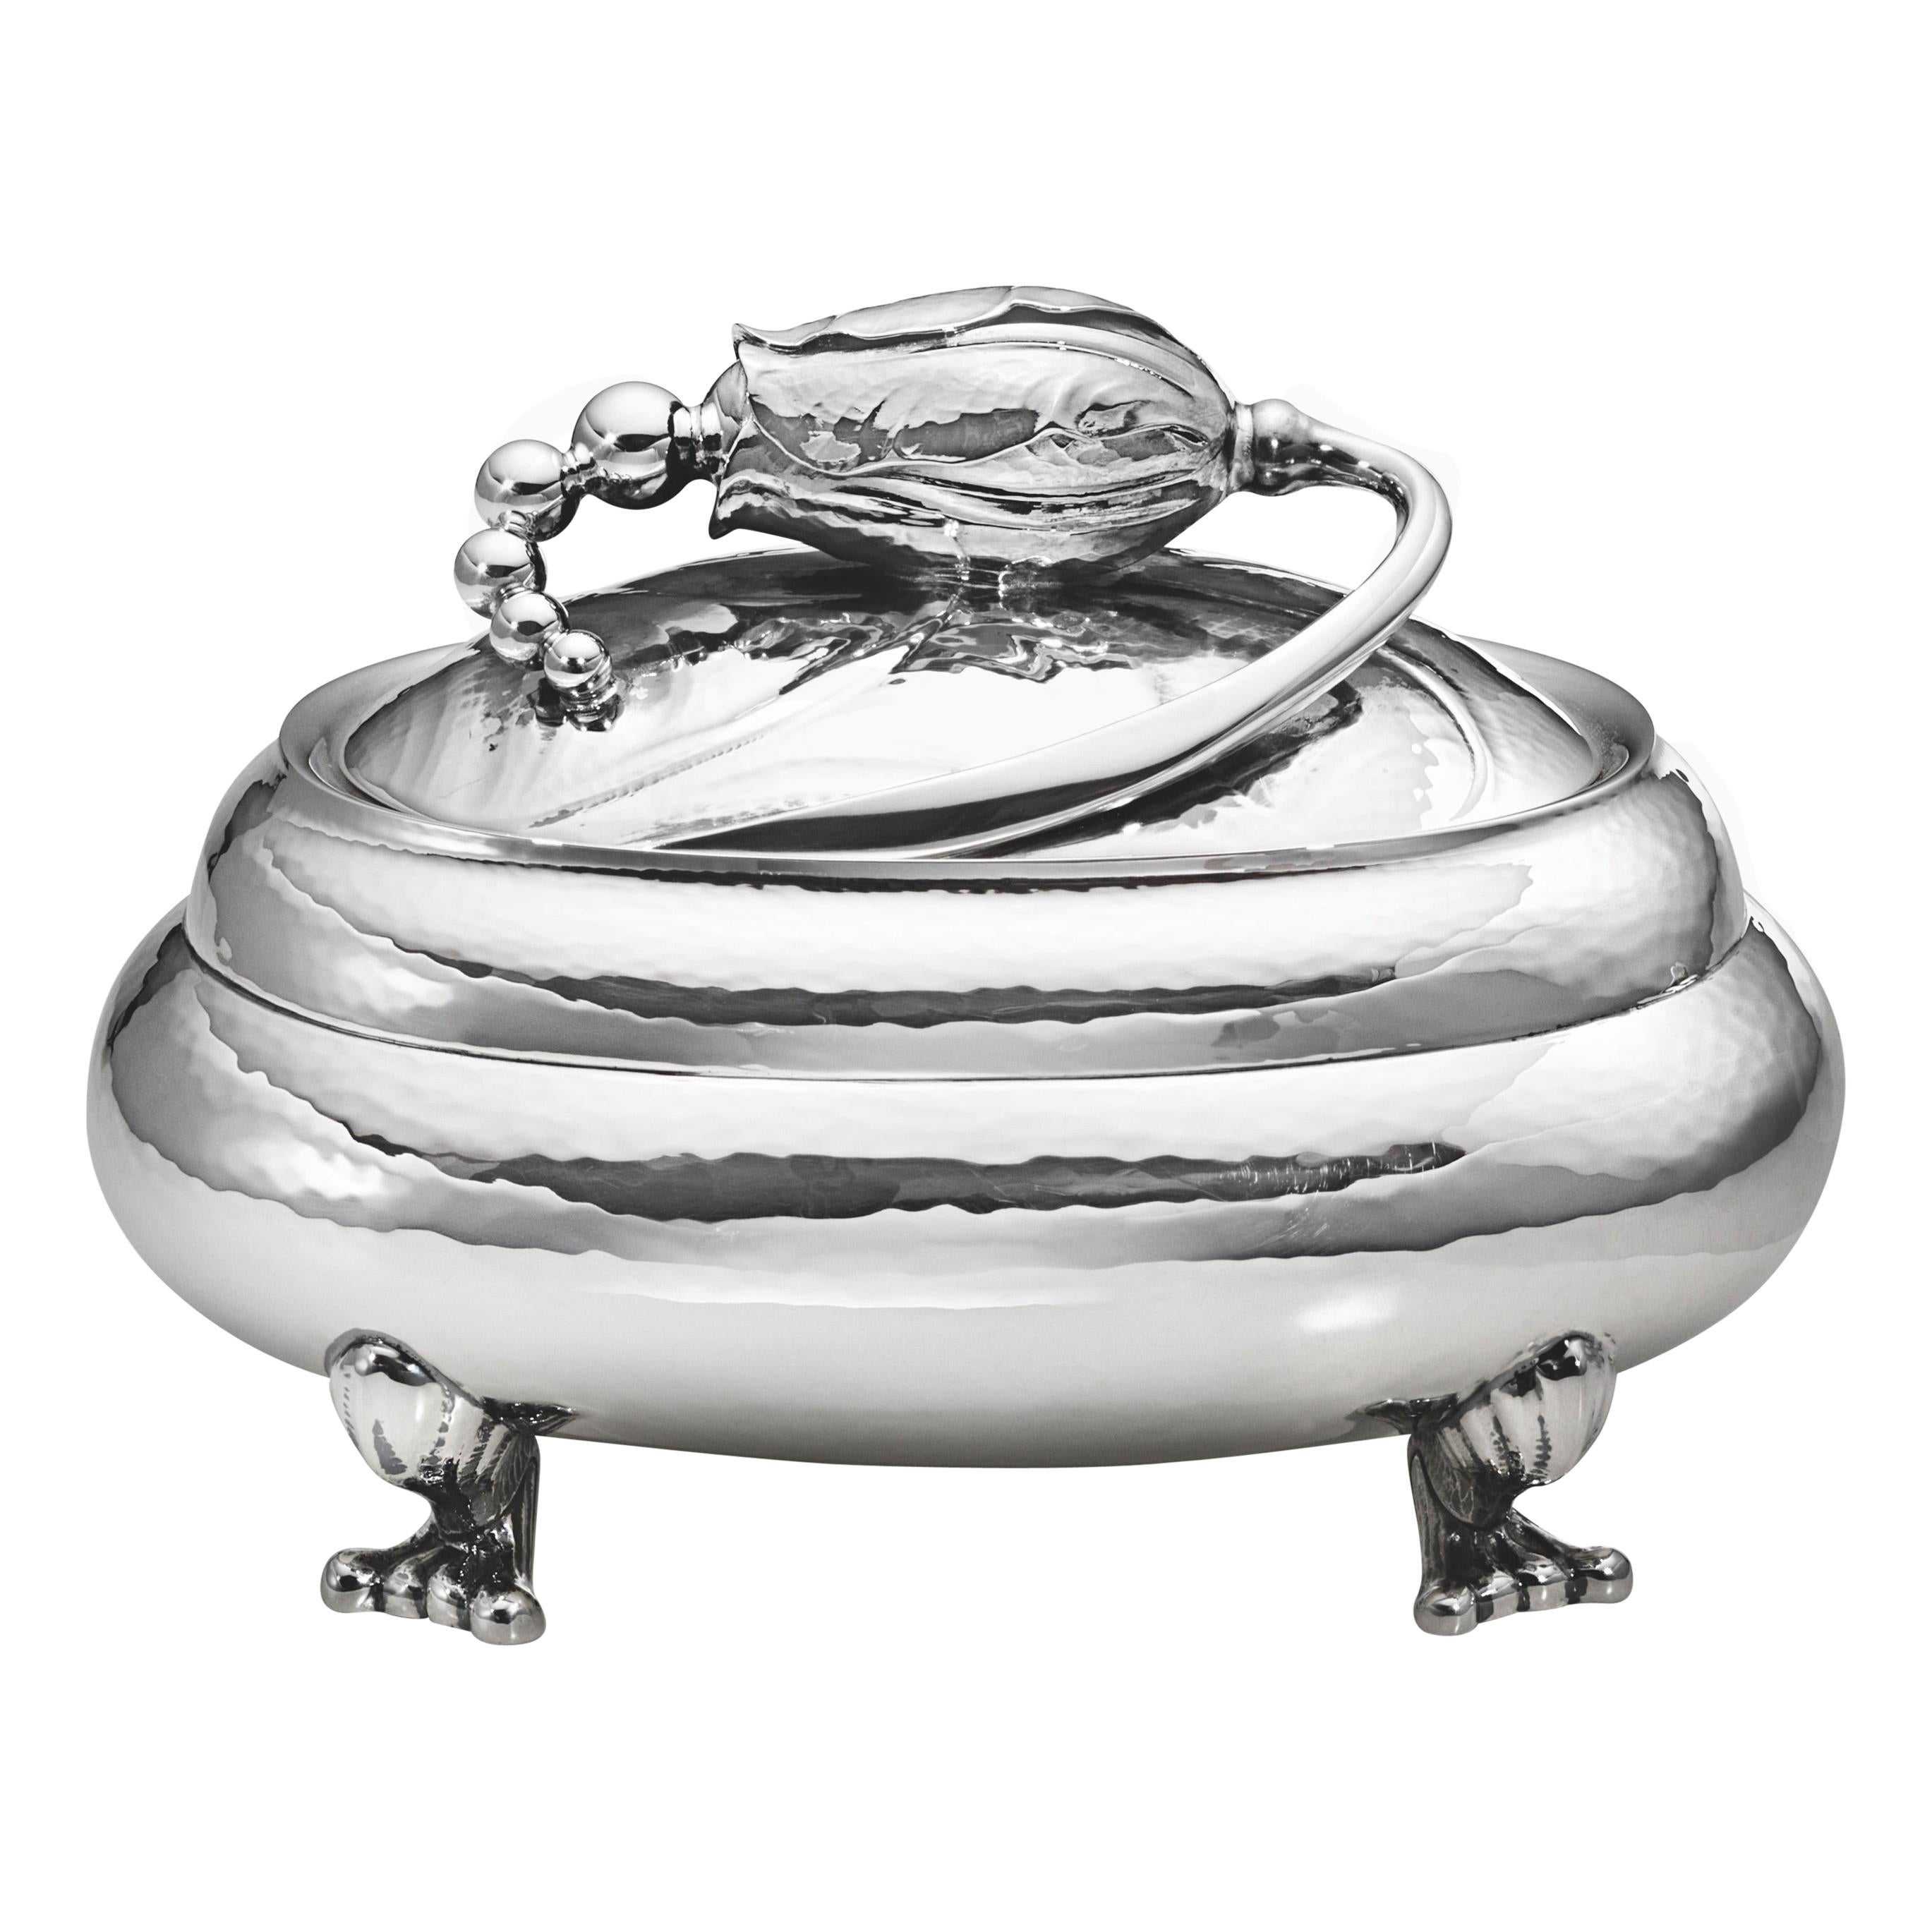 Georg Jensen Handcrafted Sterling Silver Blossom Bonbonnière 2 and Lid